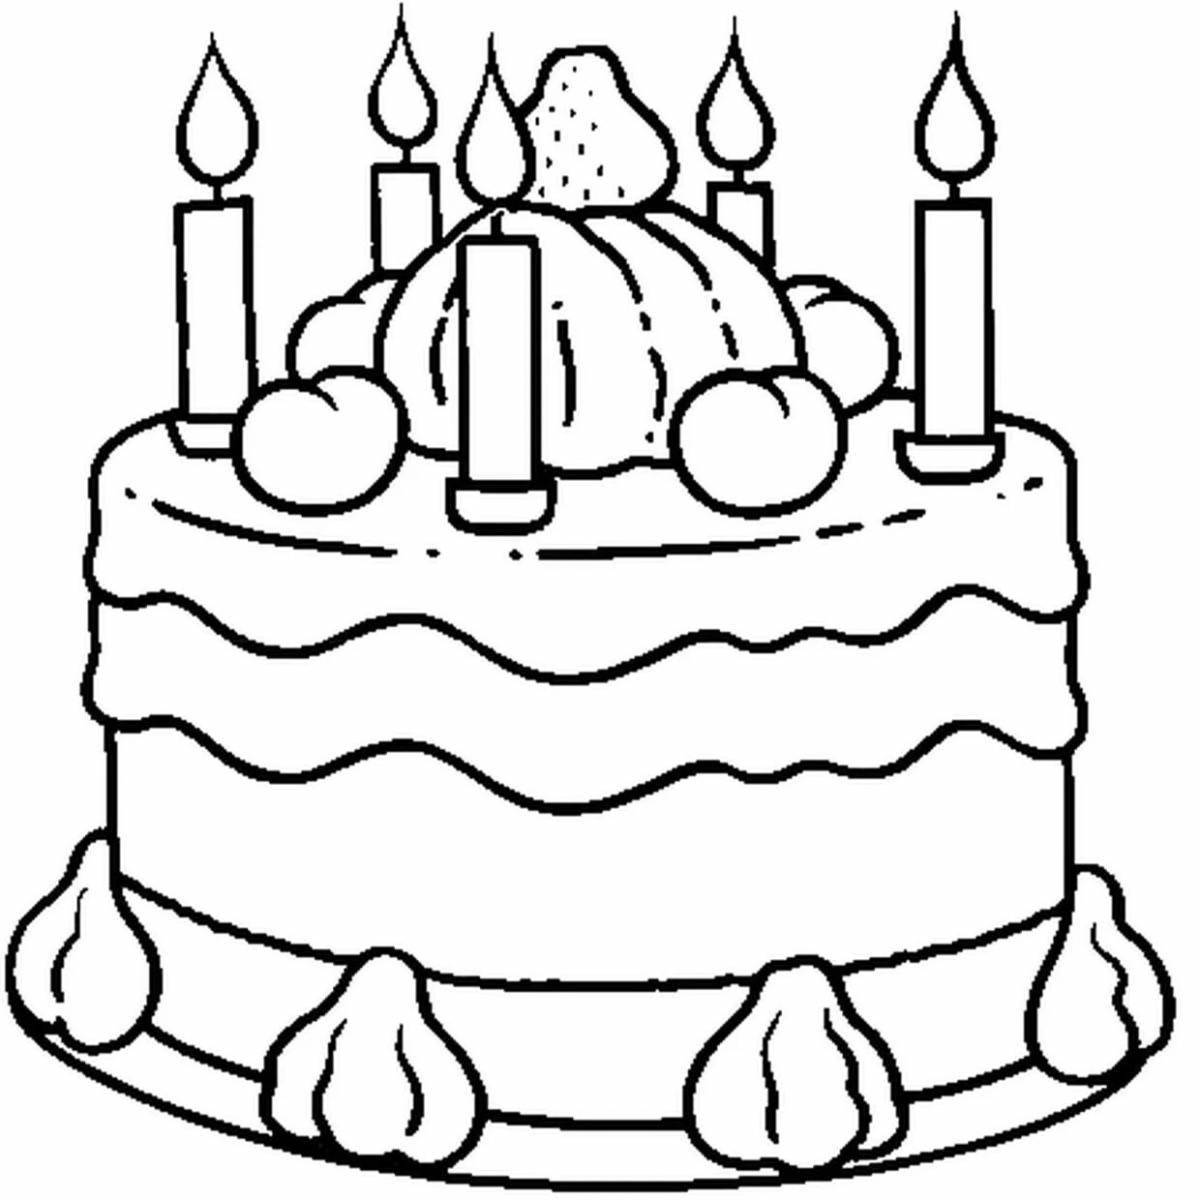 Fun coloring cake for 3-4 year olds